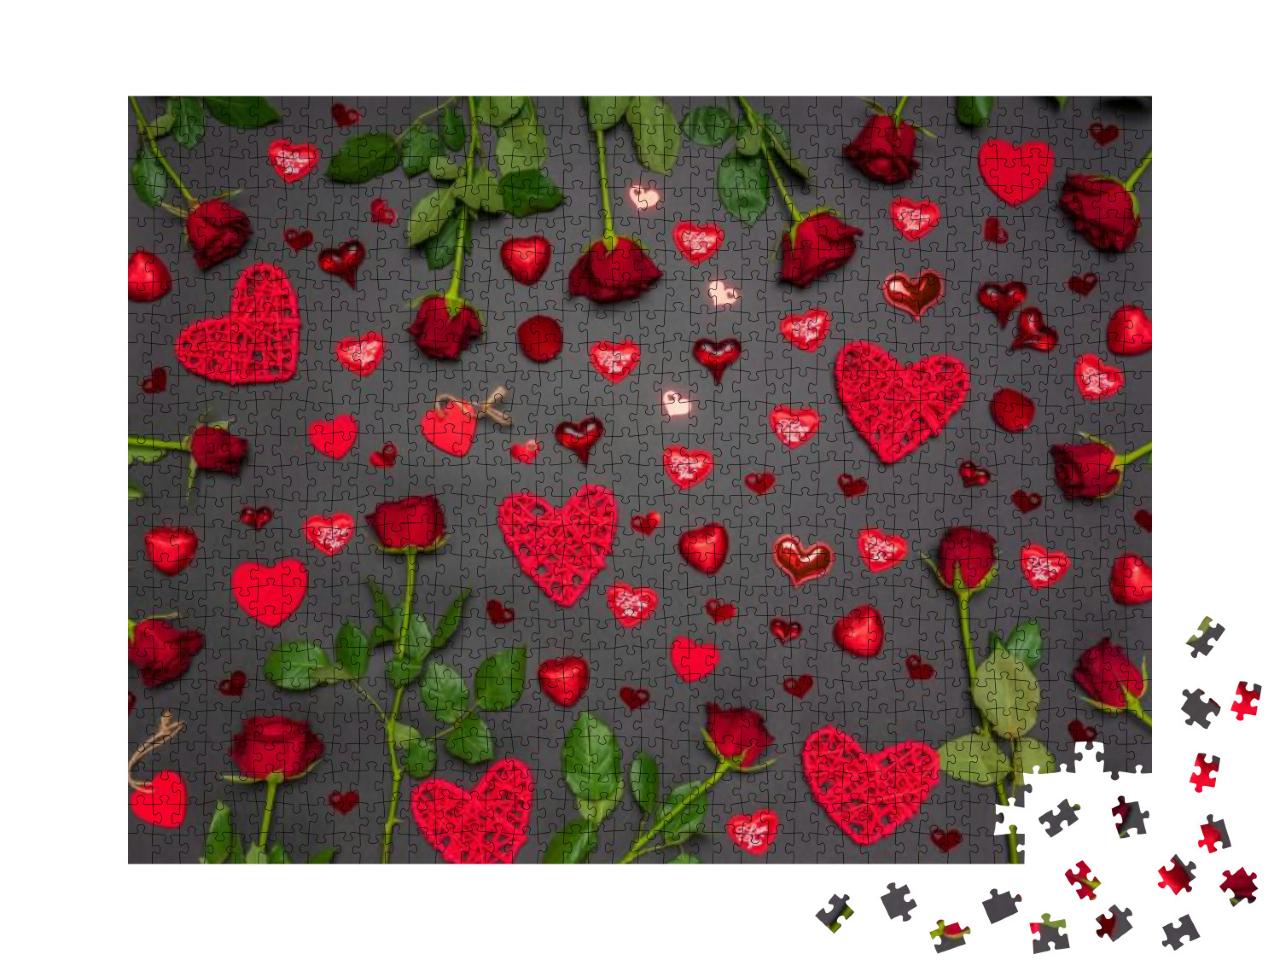 Fresh Rose Flowers, Decorative Hearts & Sweets in Red Col... Jigsaw Puzzle with 1000 pieces